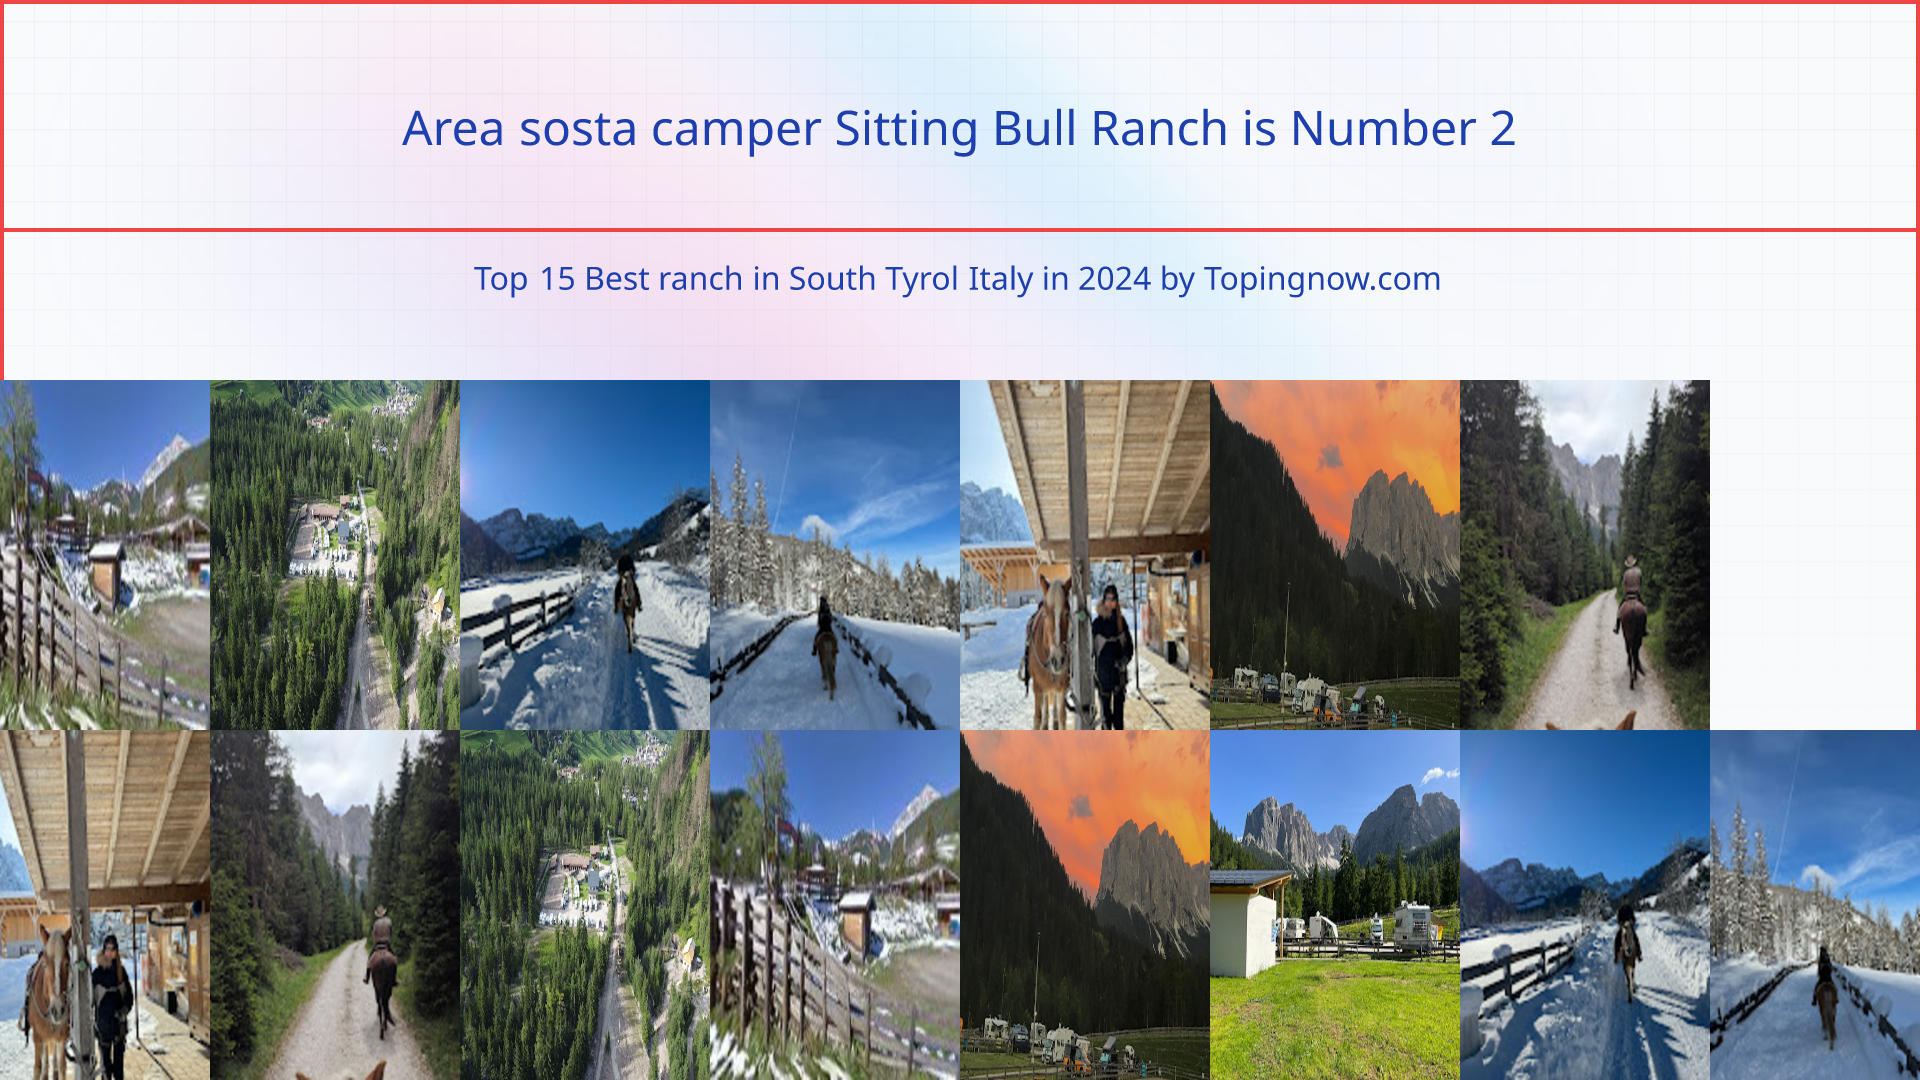 Area sosta camper Sitting Bull Ranch: Top 15 Best ranch in South Tyrol Italy in 2024